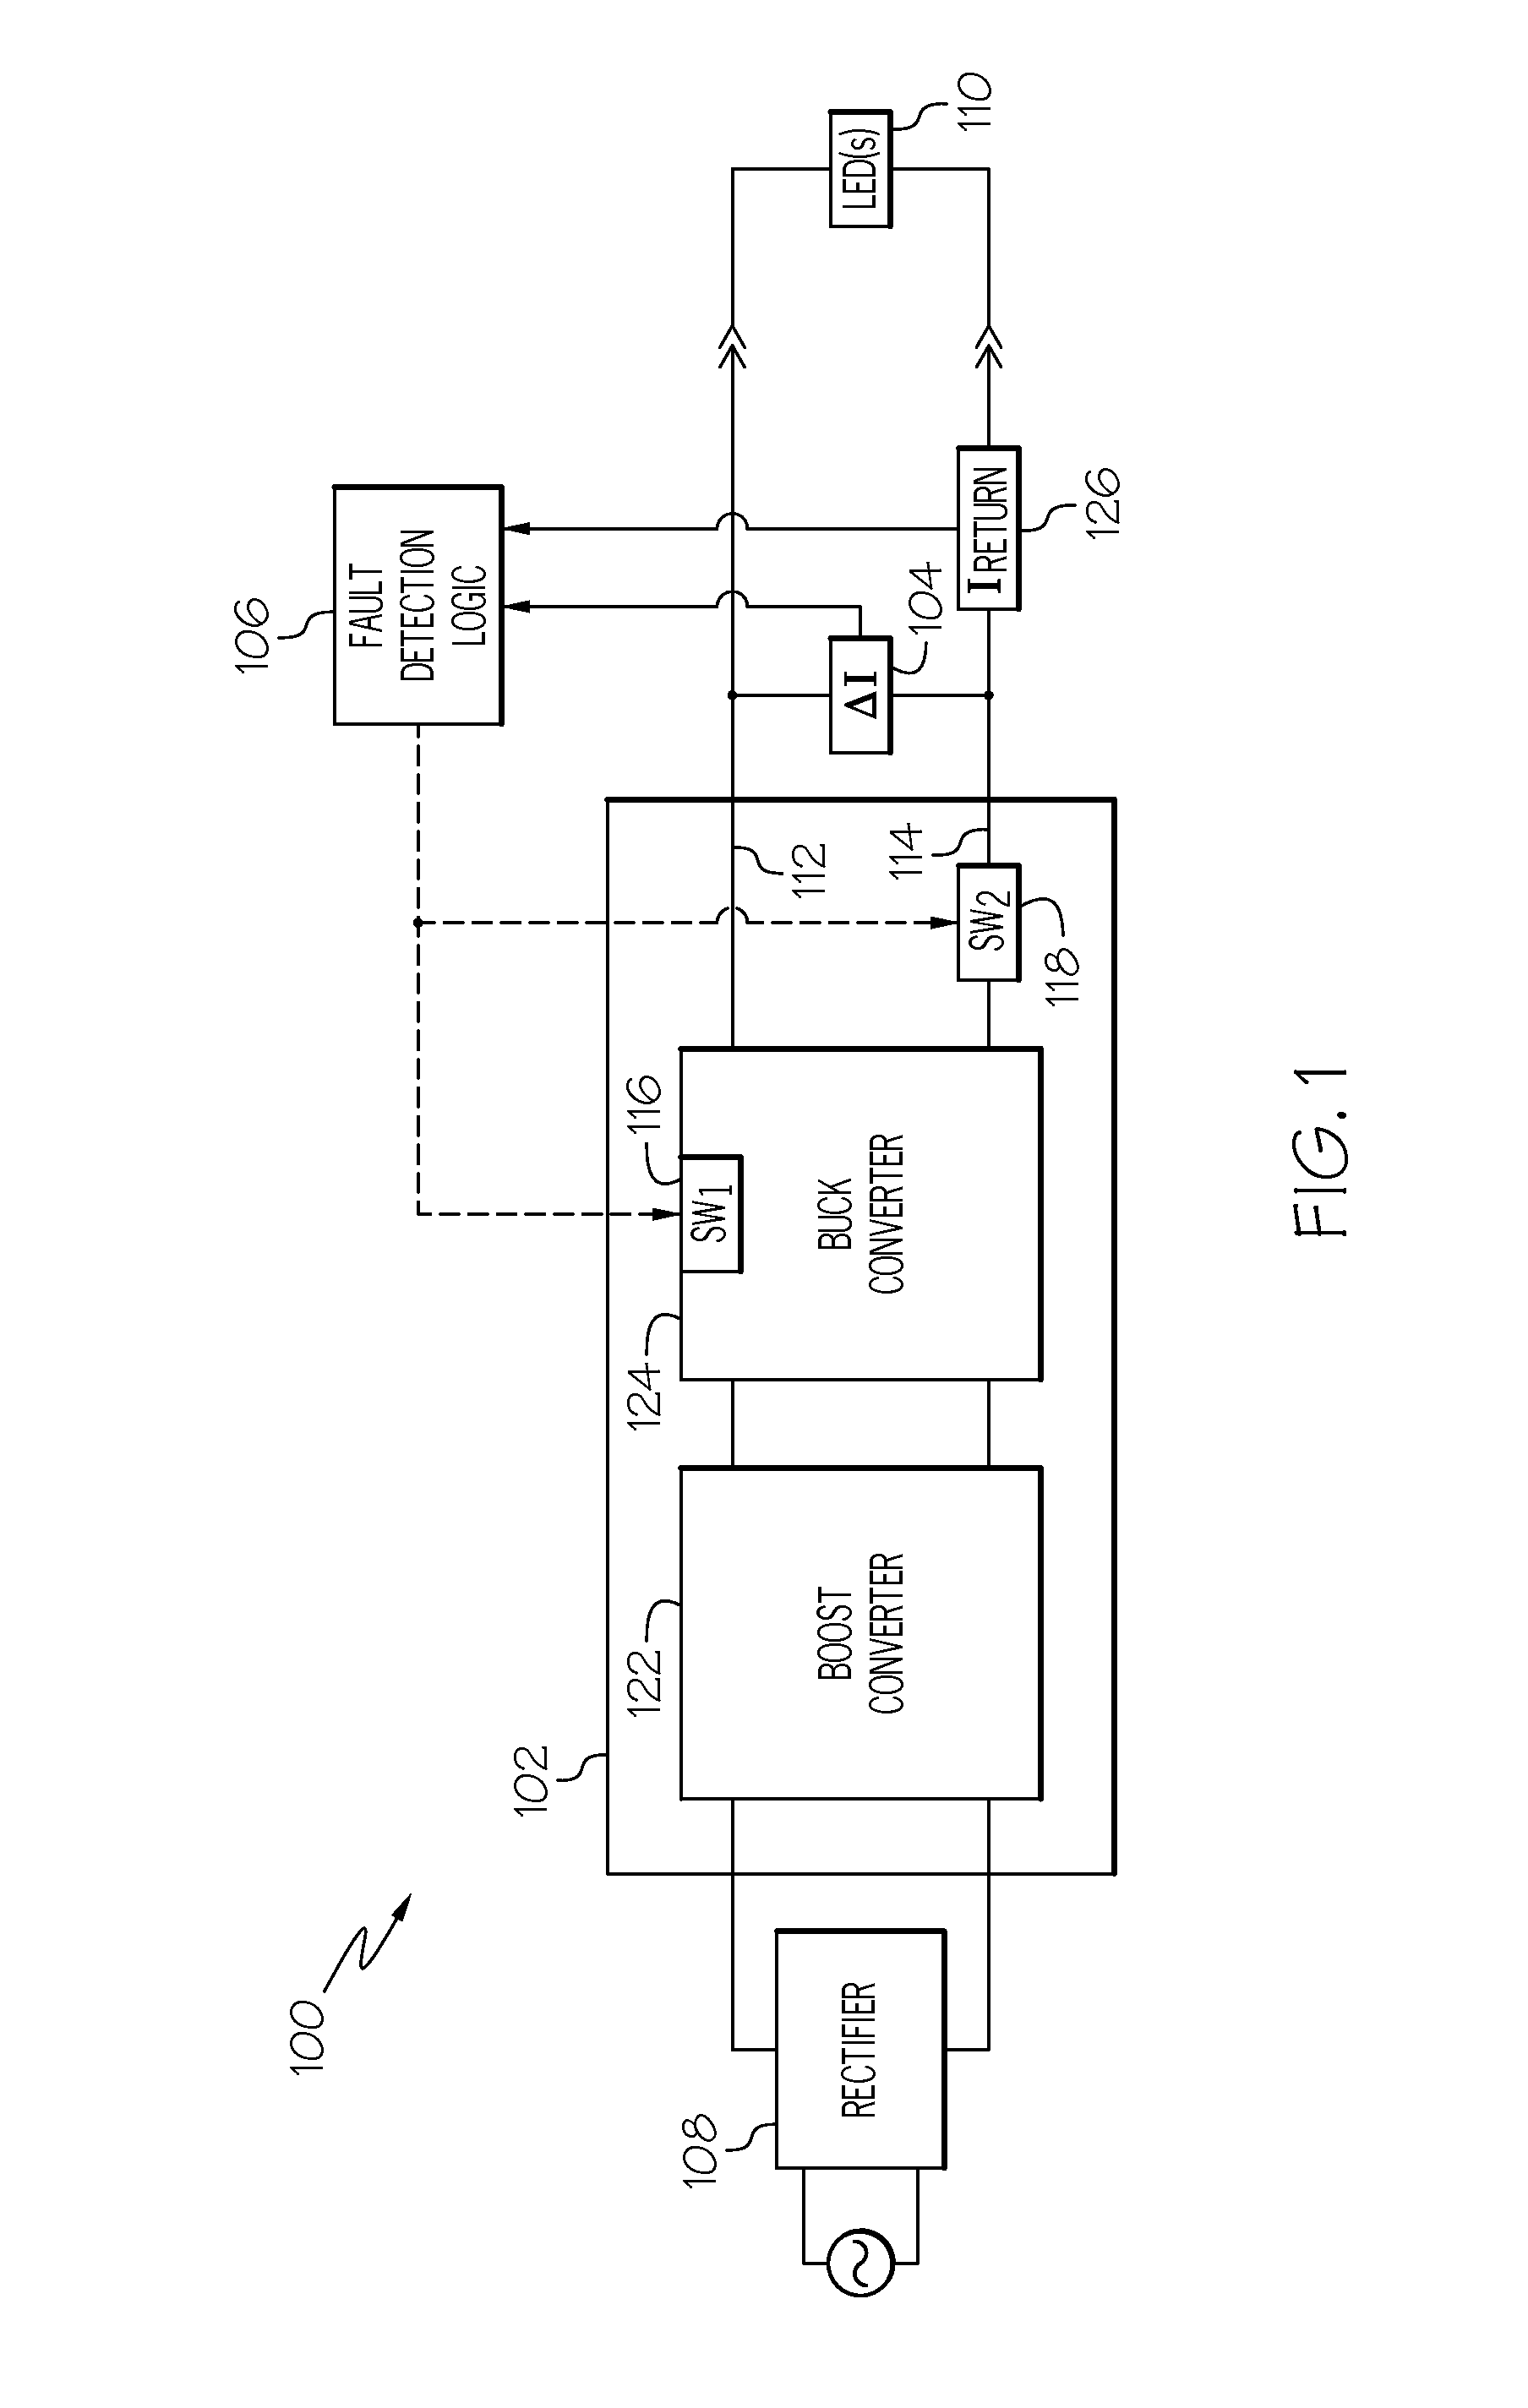 Non-isolated power supply output chassis ground fault detection and protection system